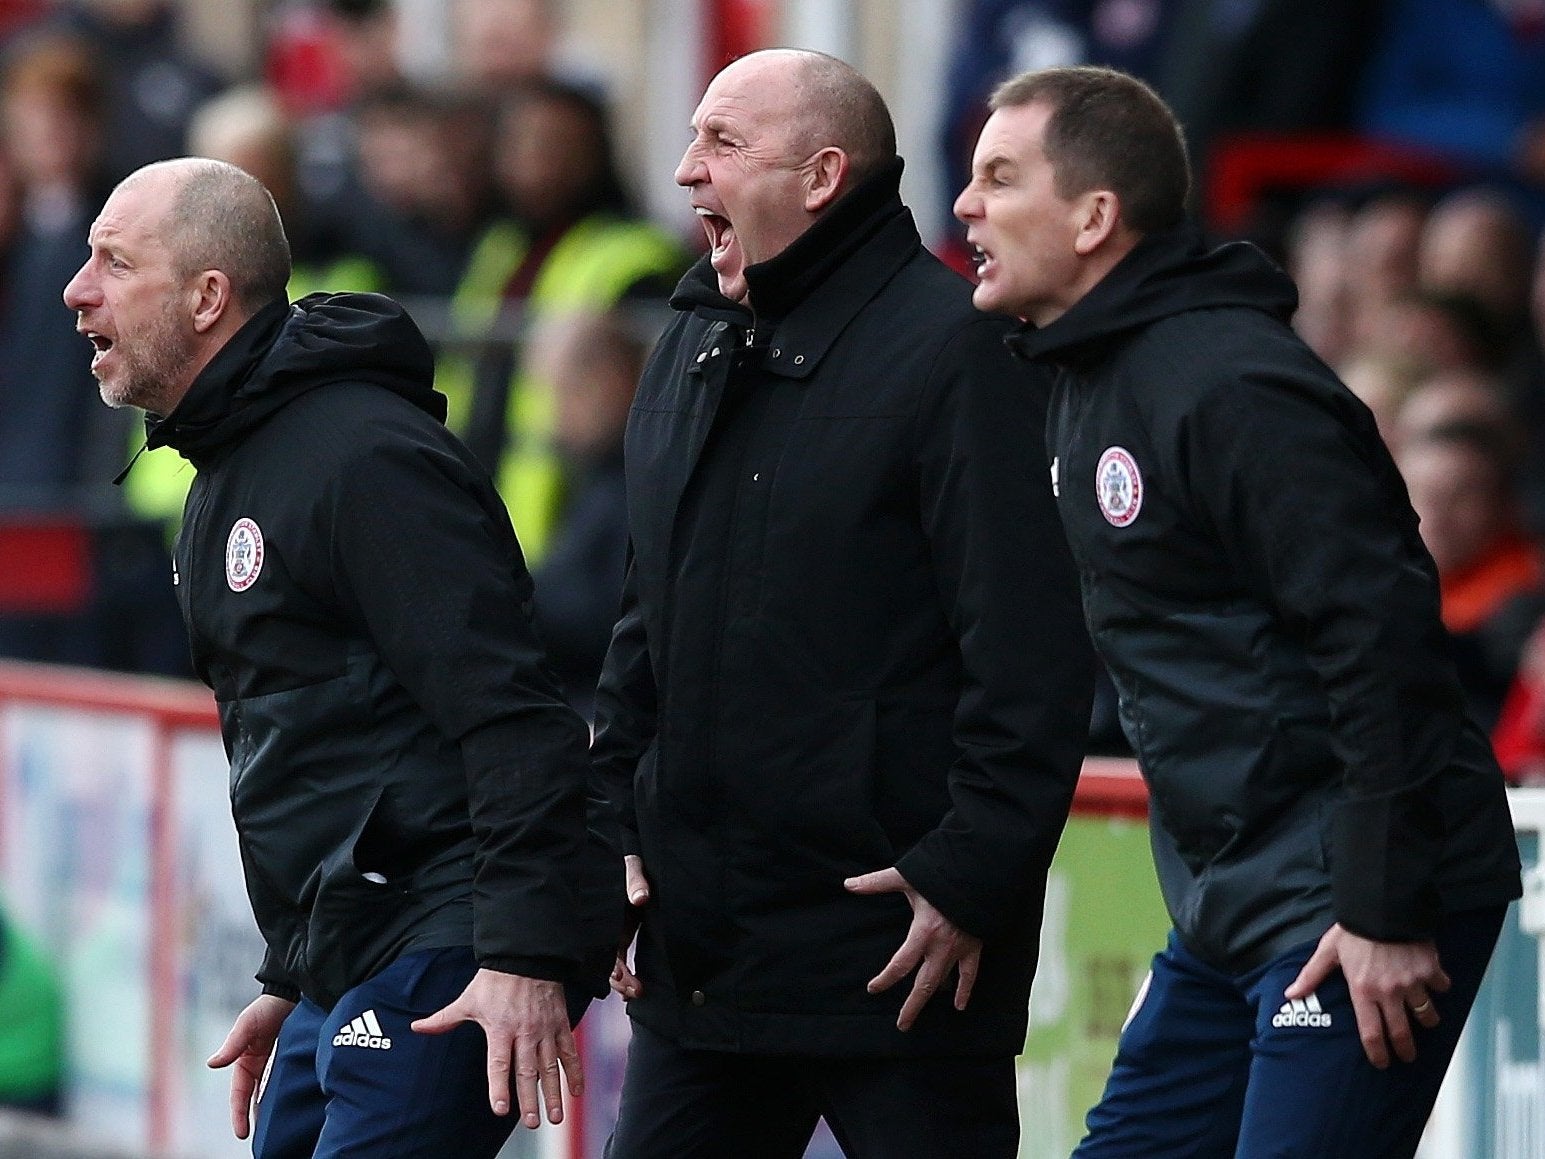 John Coleman was fuming after Accrington Stanley's defeat to Derby